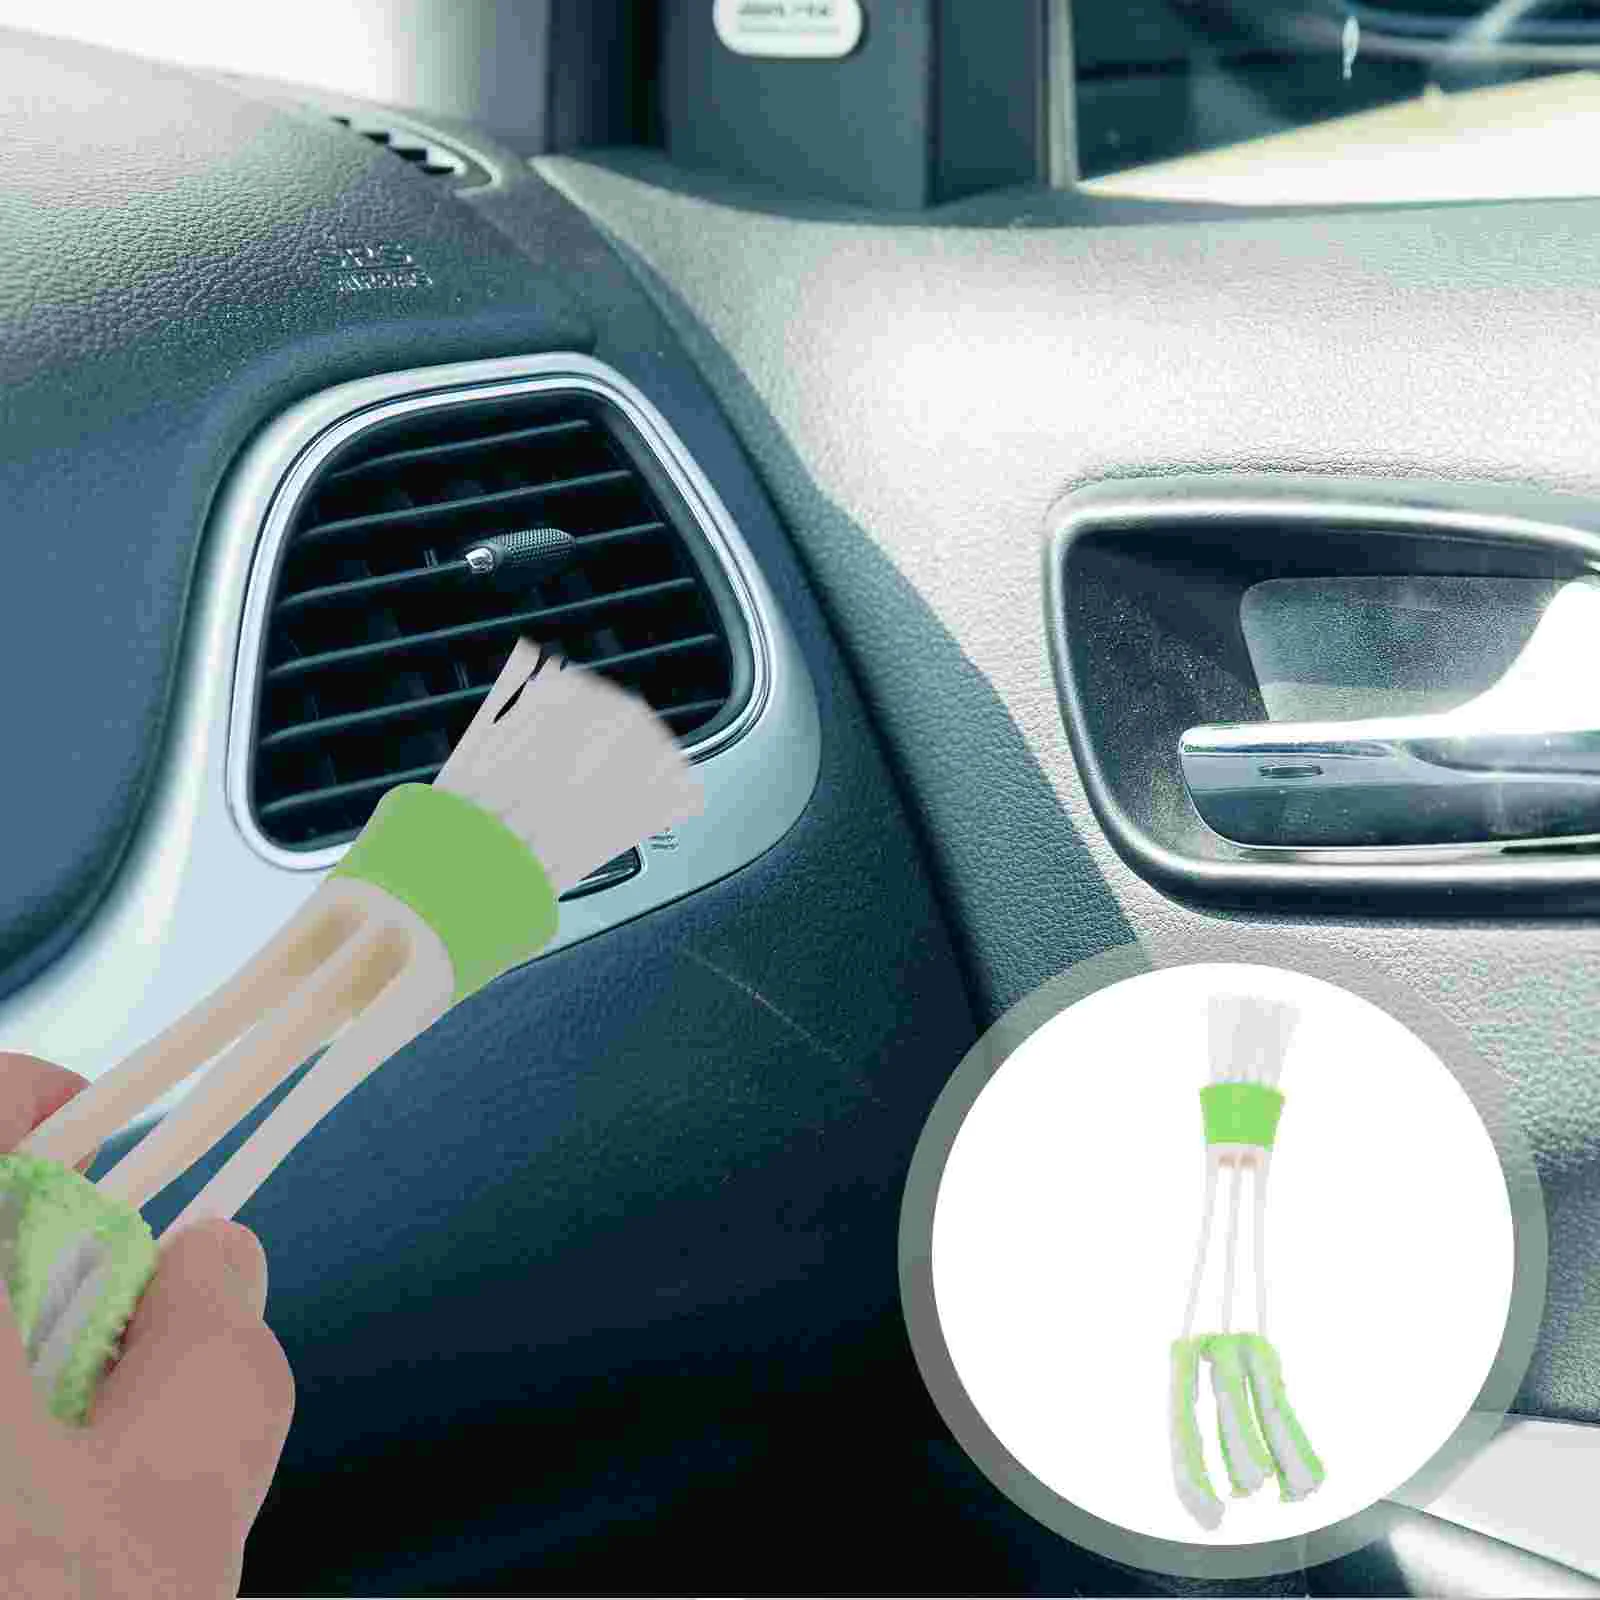 

Car Brush Cleaner Duster Window Vent Cleaning Air Detailing Blinds Groove Kit Wash Tools Gap Conditioner Auto Shutter Toolleaves